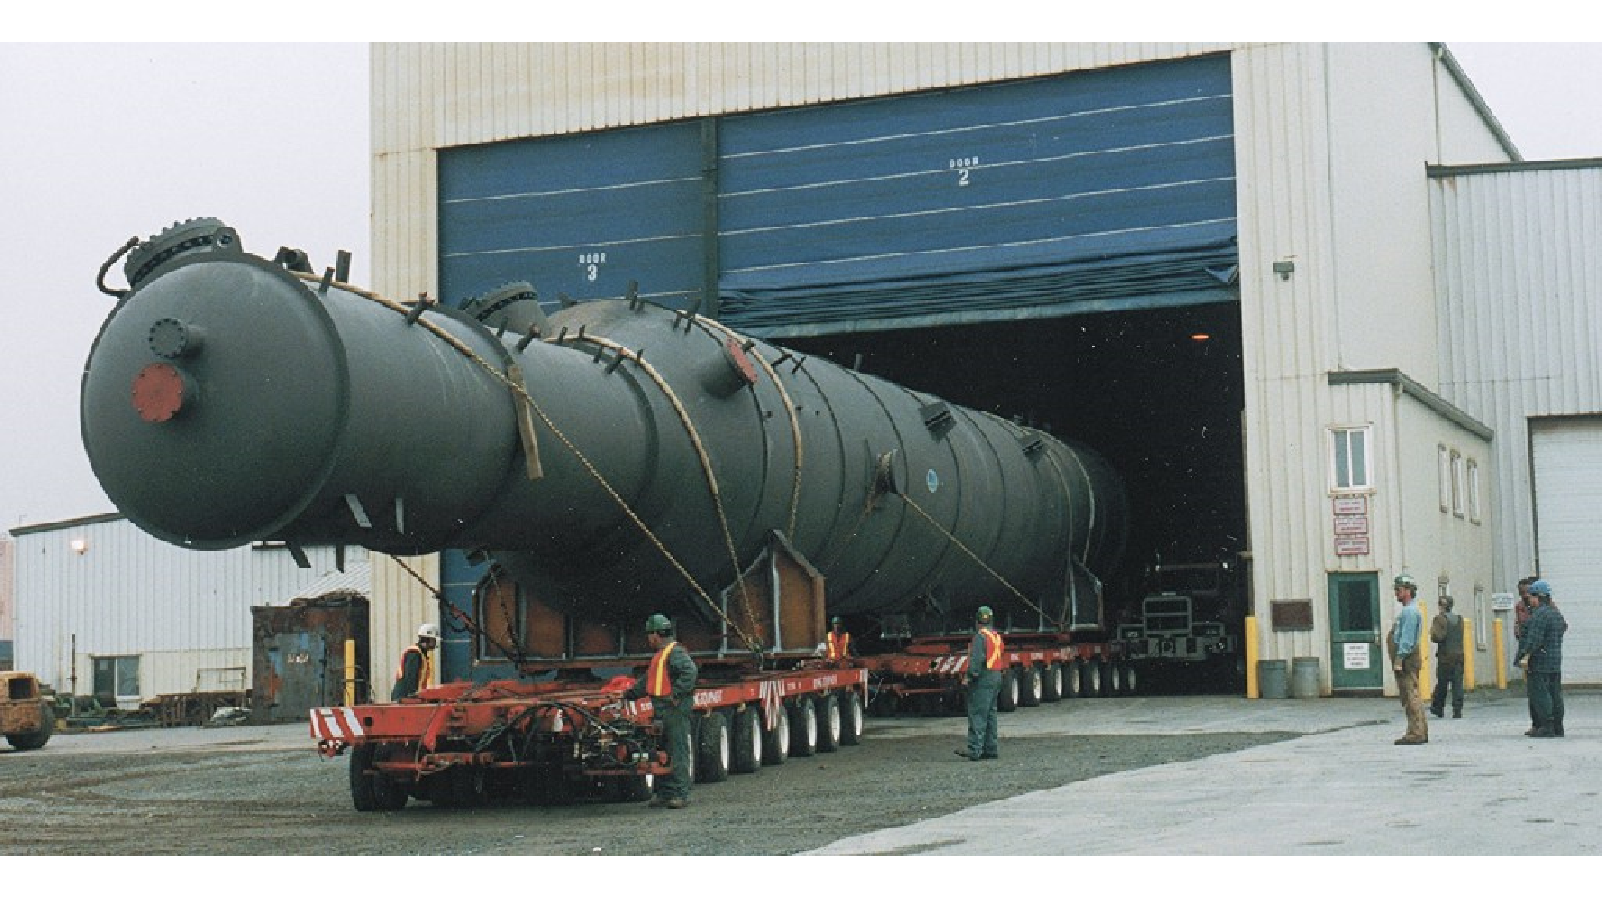 Figure 2:  Examples of pressure vessels in transportation.  The upper images shows a vessel attached to a schnabel train car.  The vessel in the lower image is mounted in saddle supports atop multiple flatbed trailers.